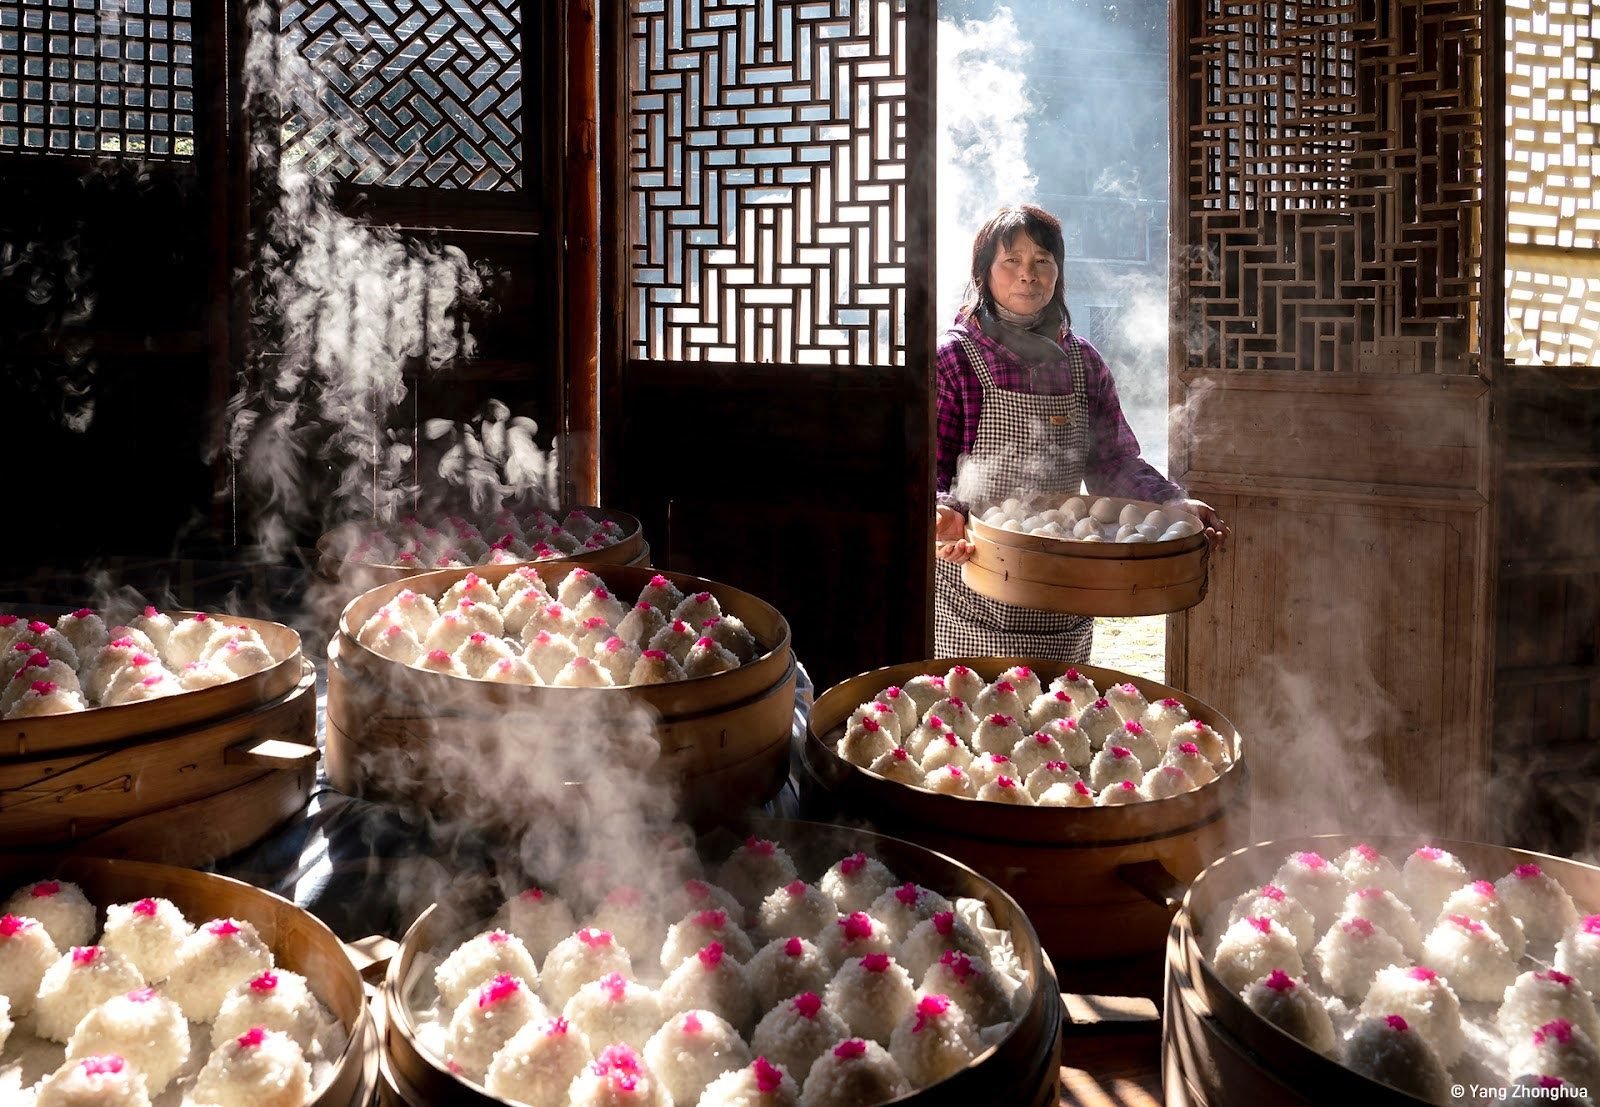 Detail from Zhonghua Yang’s image of a woman preparing steamed dim sum for a Lunar New Year celebration in Xiangshan, Zhejiang province, eastern China which won the overall prize in a global food photography contest. Photo: Zhonghua Yang/Pink Lady